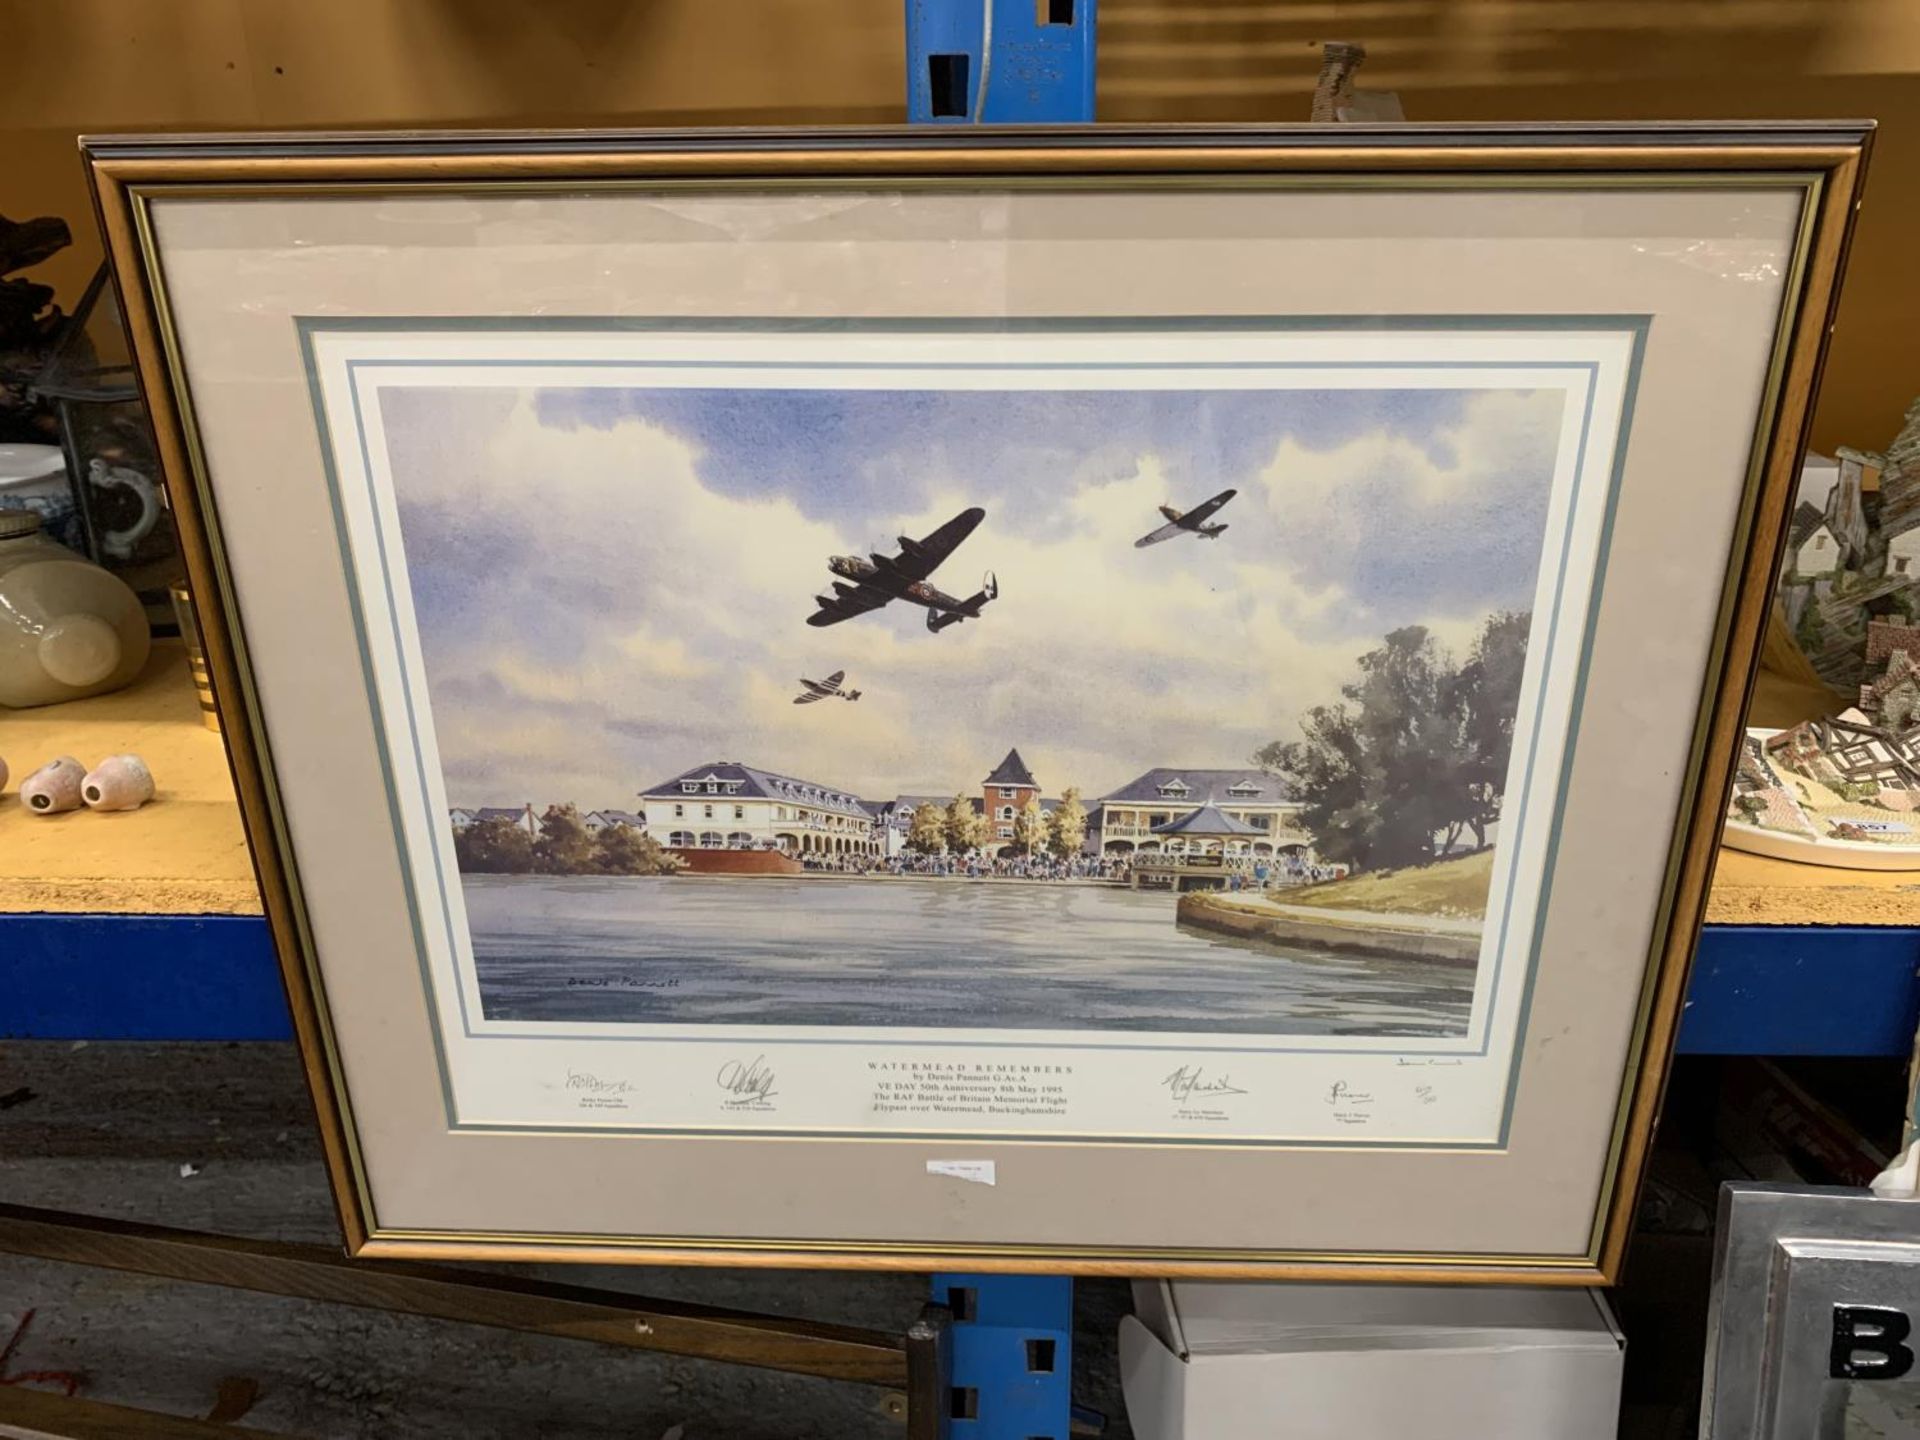 A LIMITED EDITION 414/500 SIGNED COLOUR PRINT OF "WATERMEAD REMEMBERS" DATED 1995, 45CM X 58CM